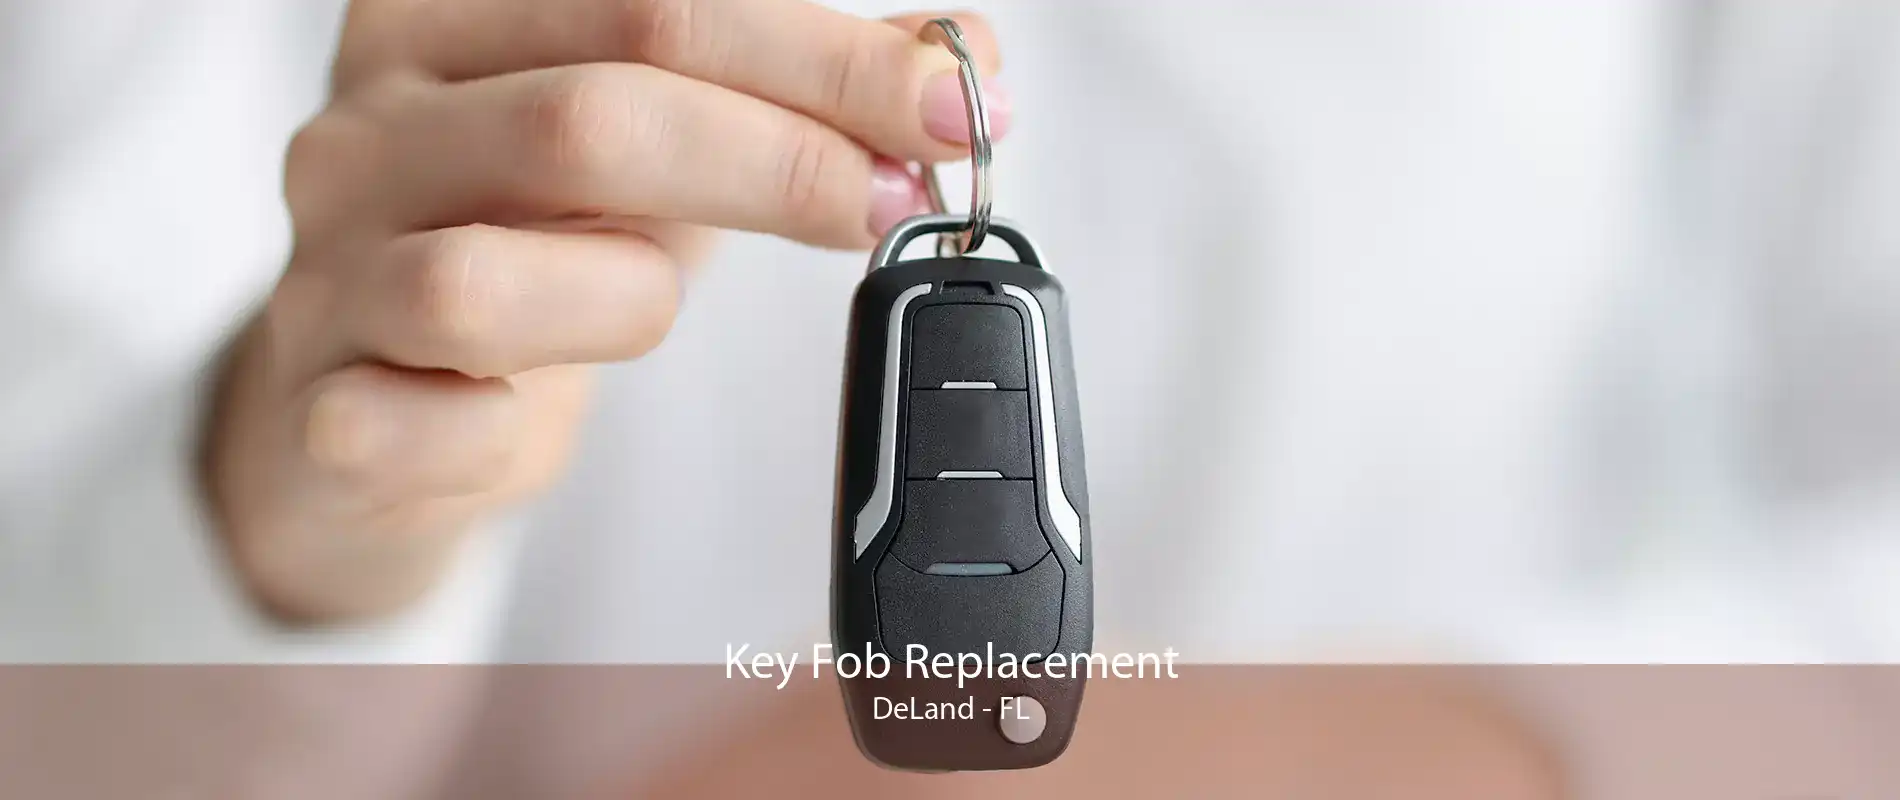 Key Fob Replacement DeLand - FL